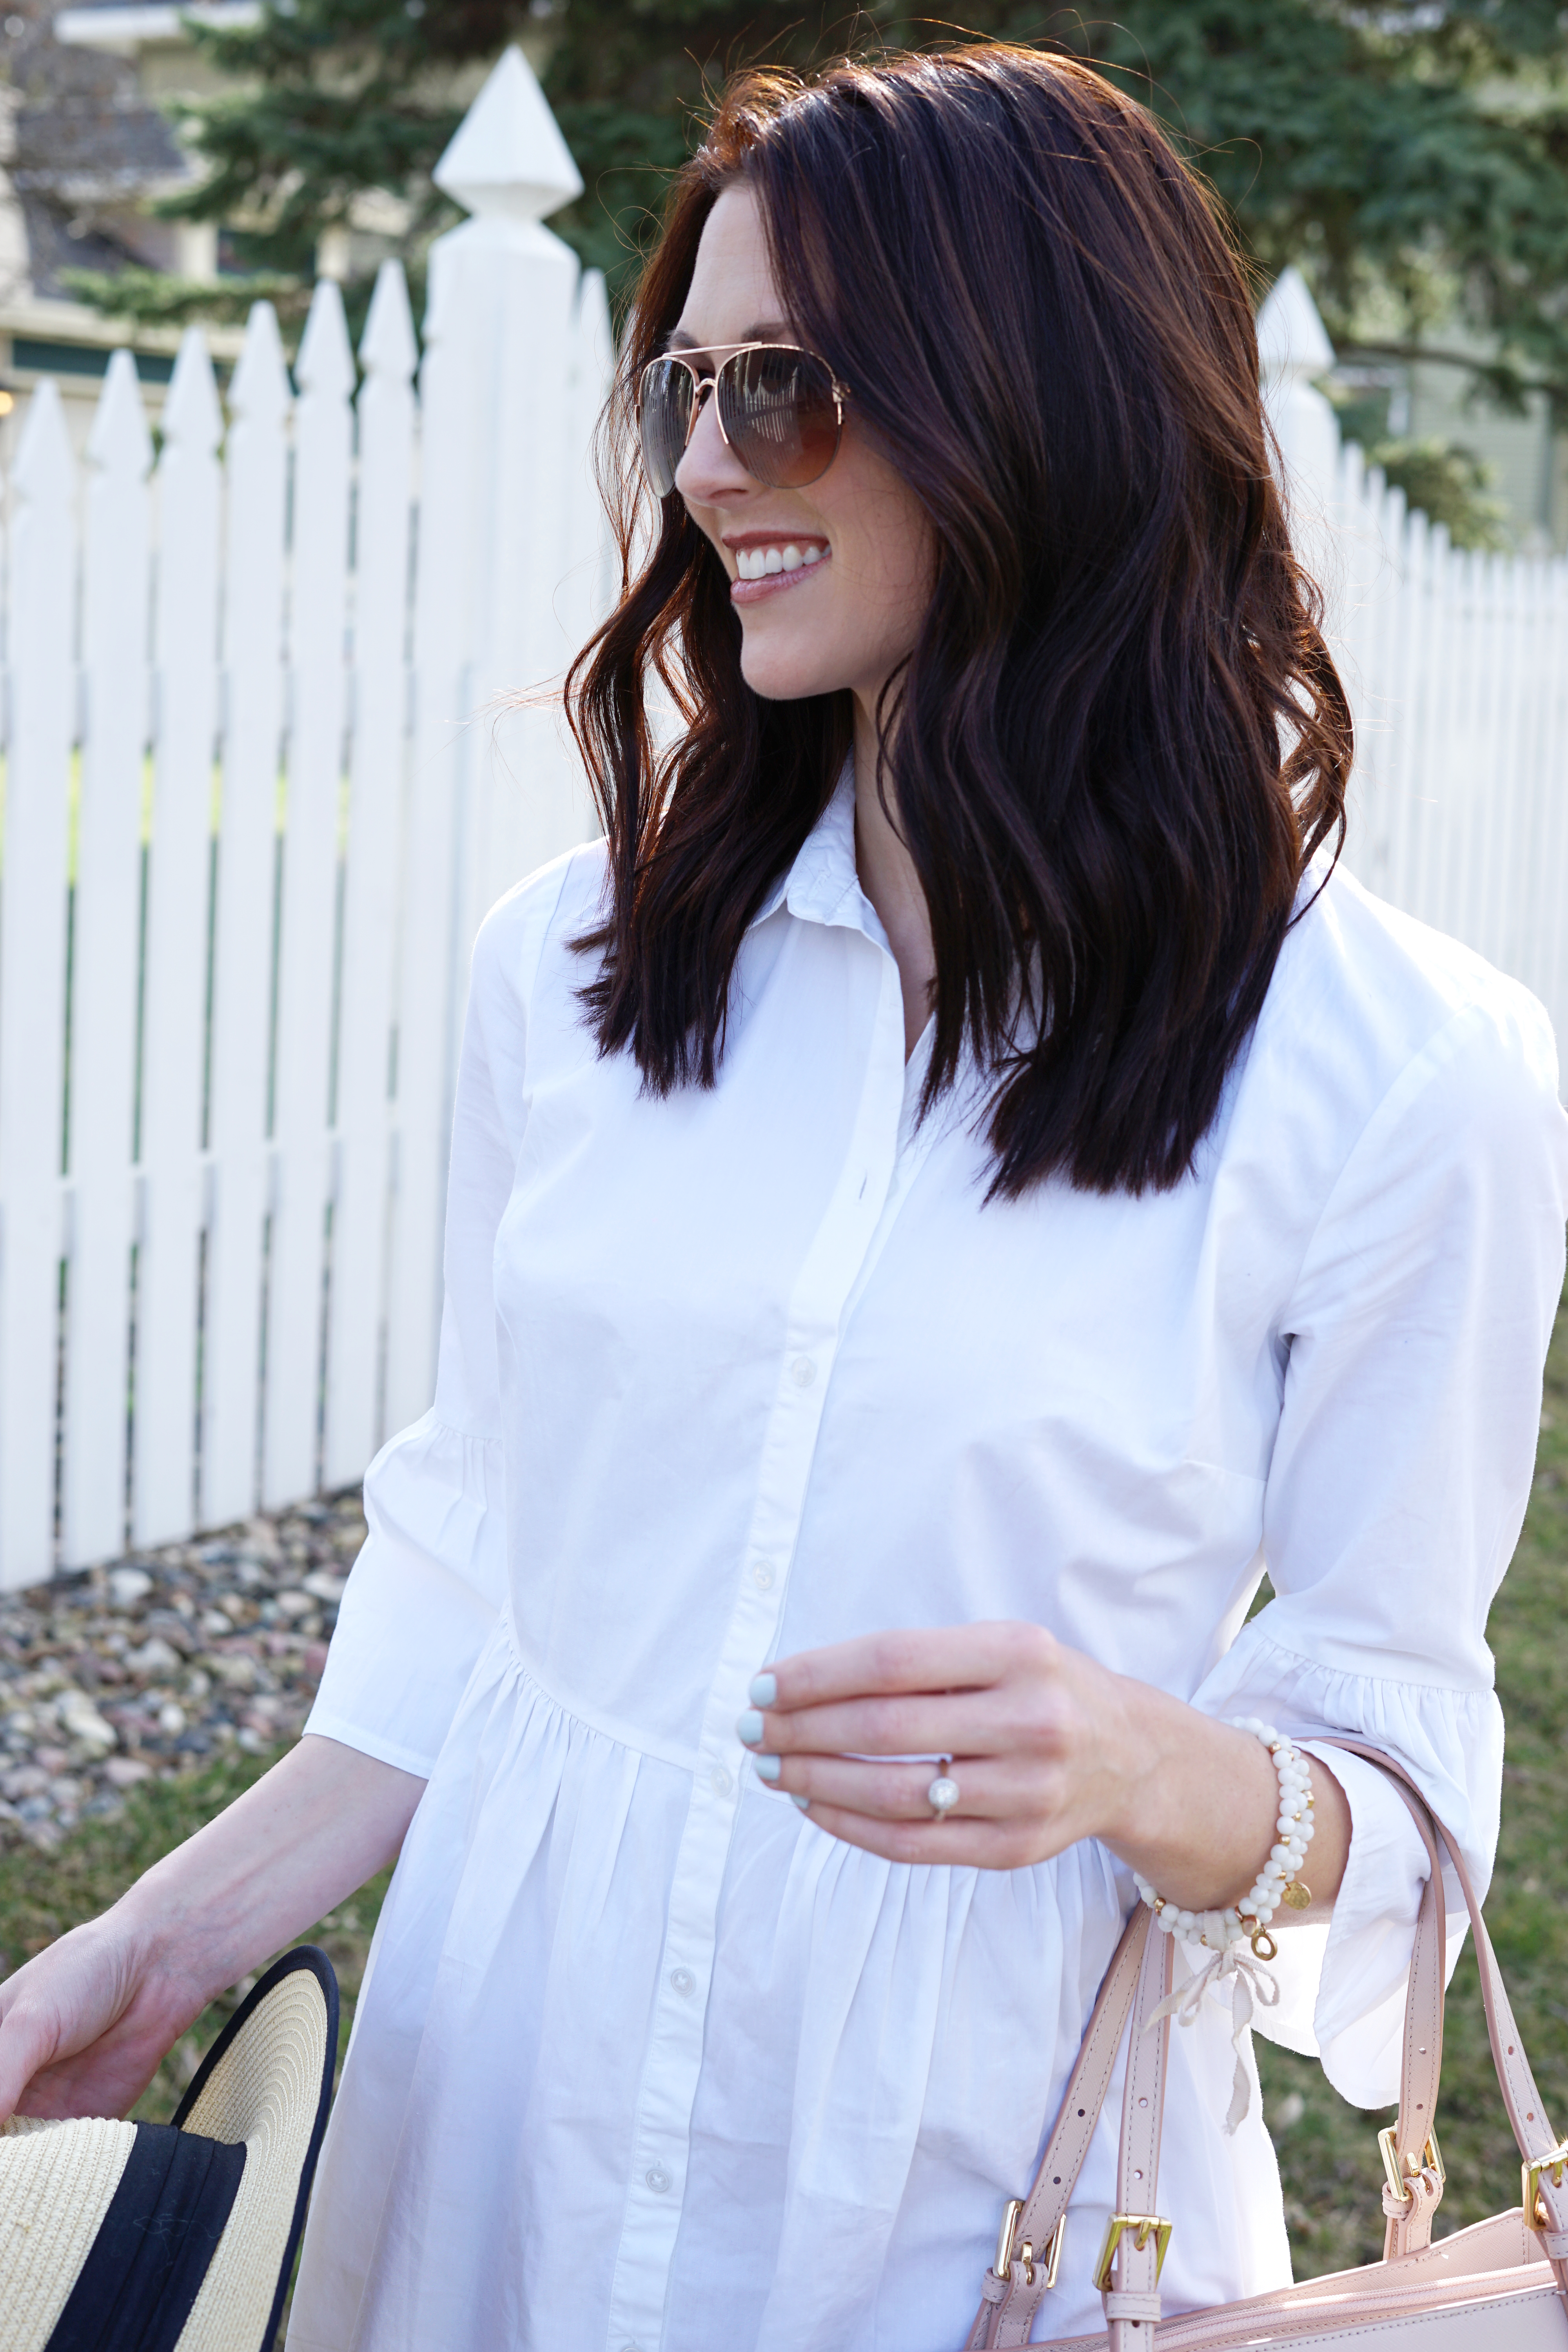 Bell Sleeved Shirt Dress - Midwest In Style